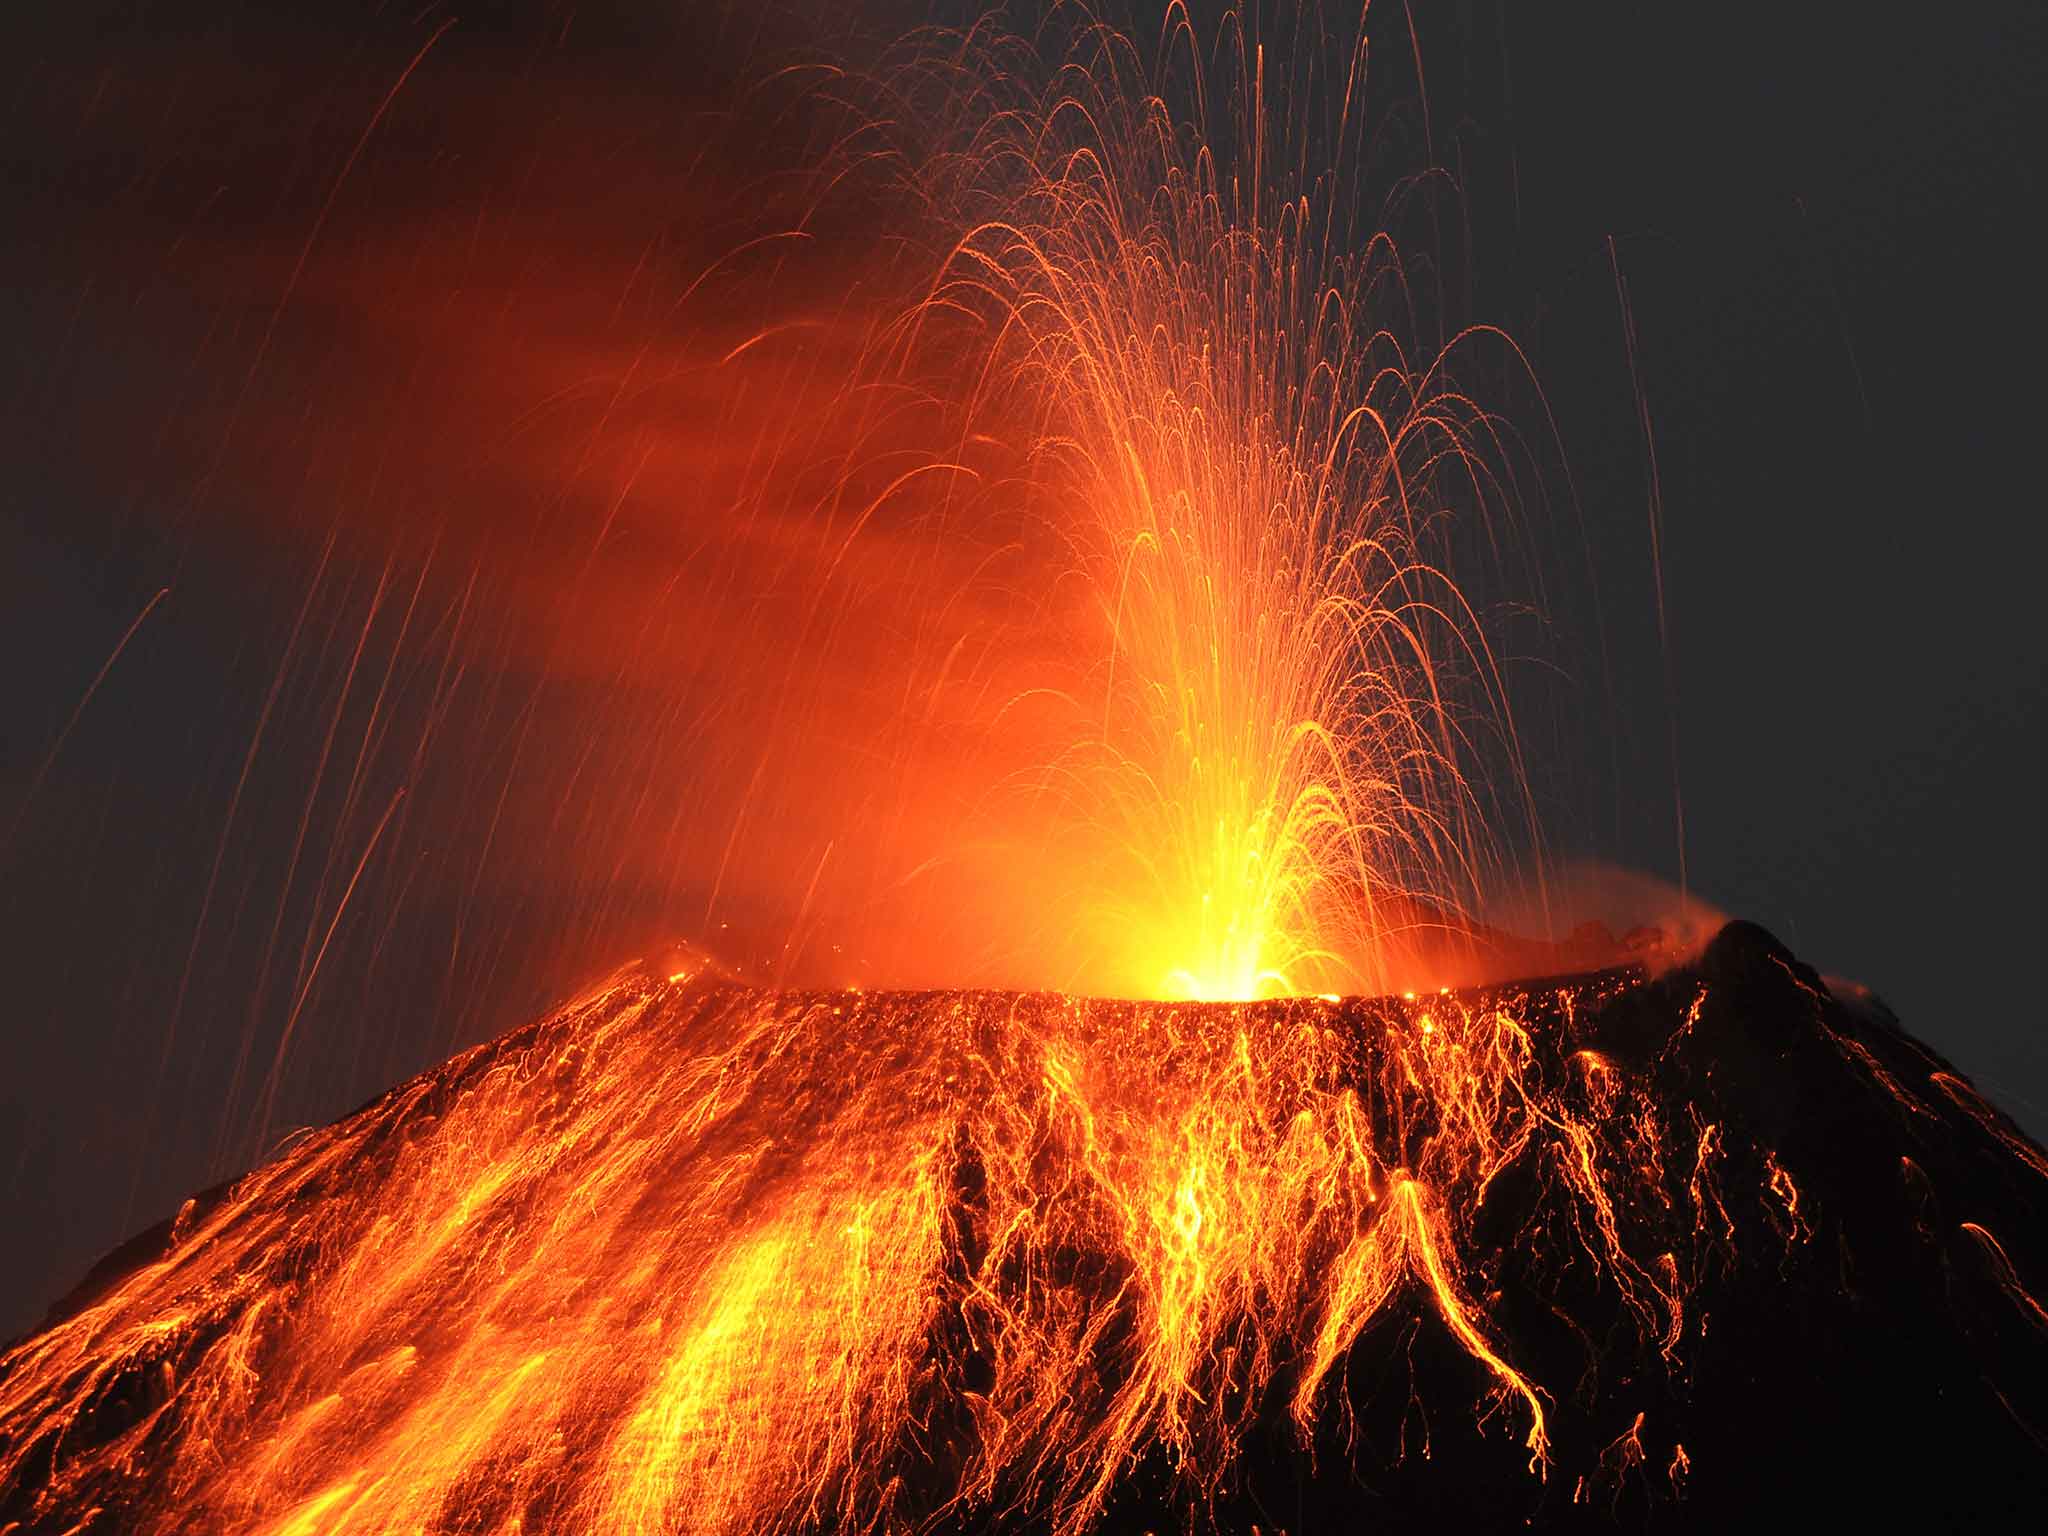 A volcanic eruption is always an awe-inspiring and terrifying sight